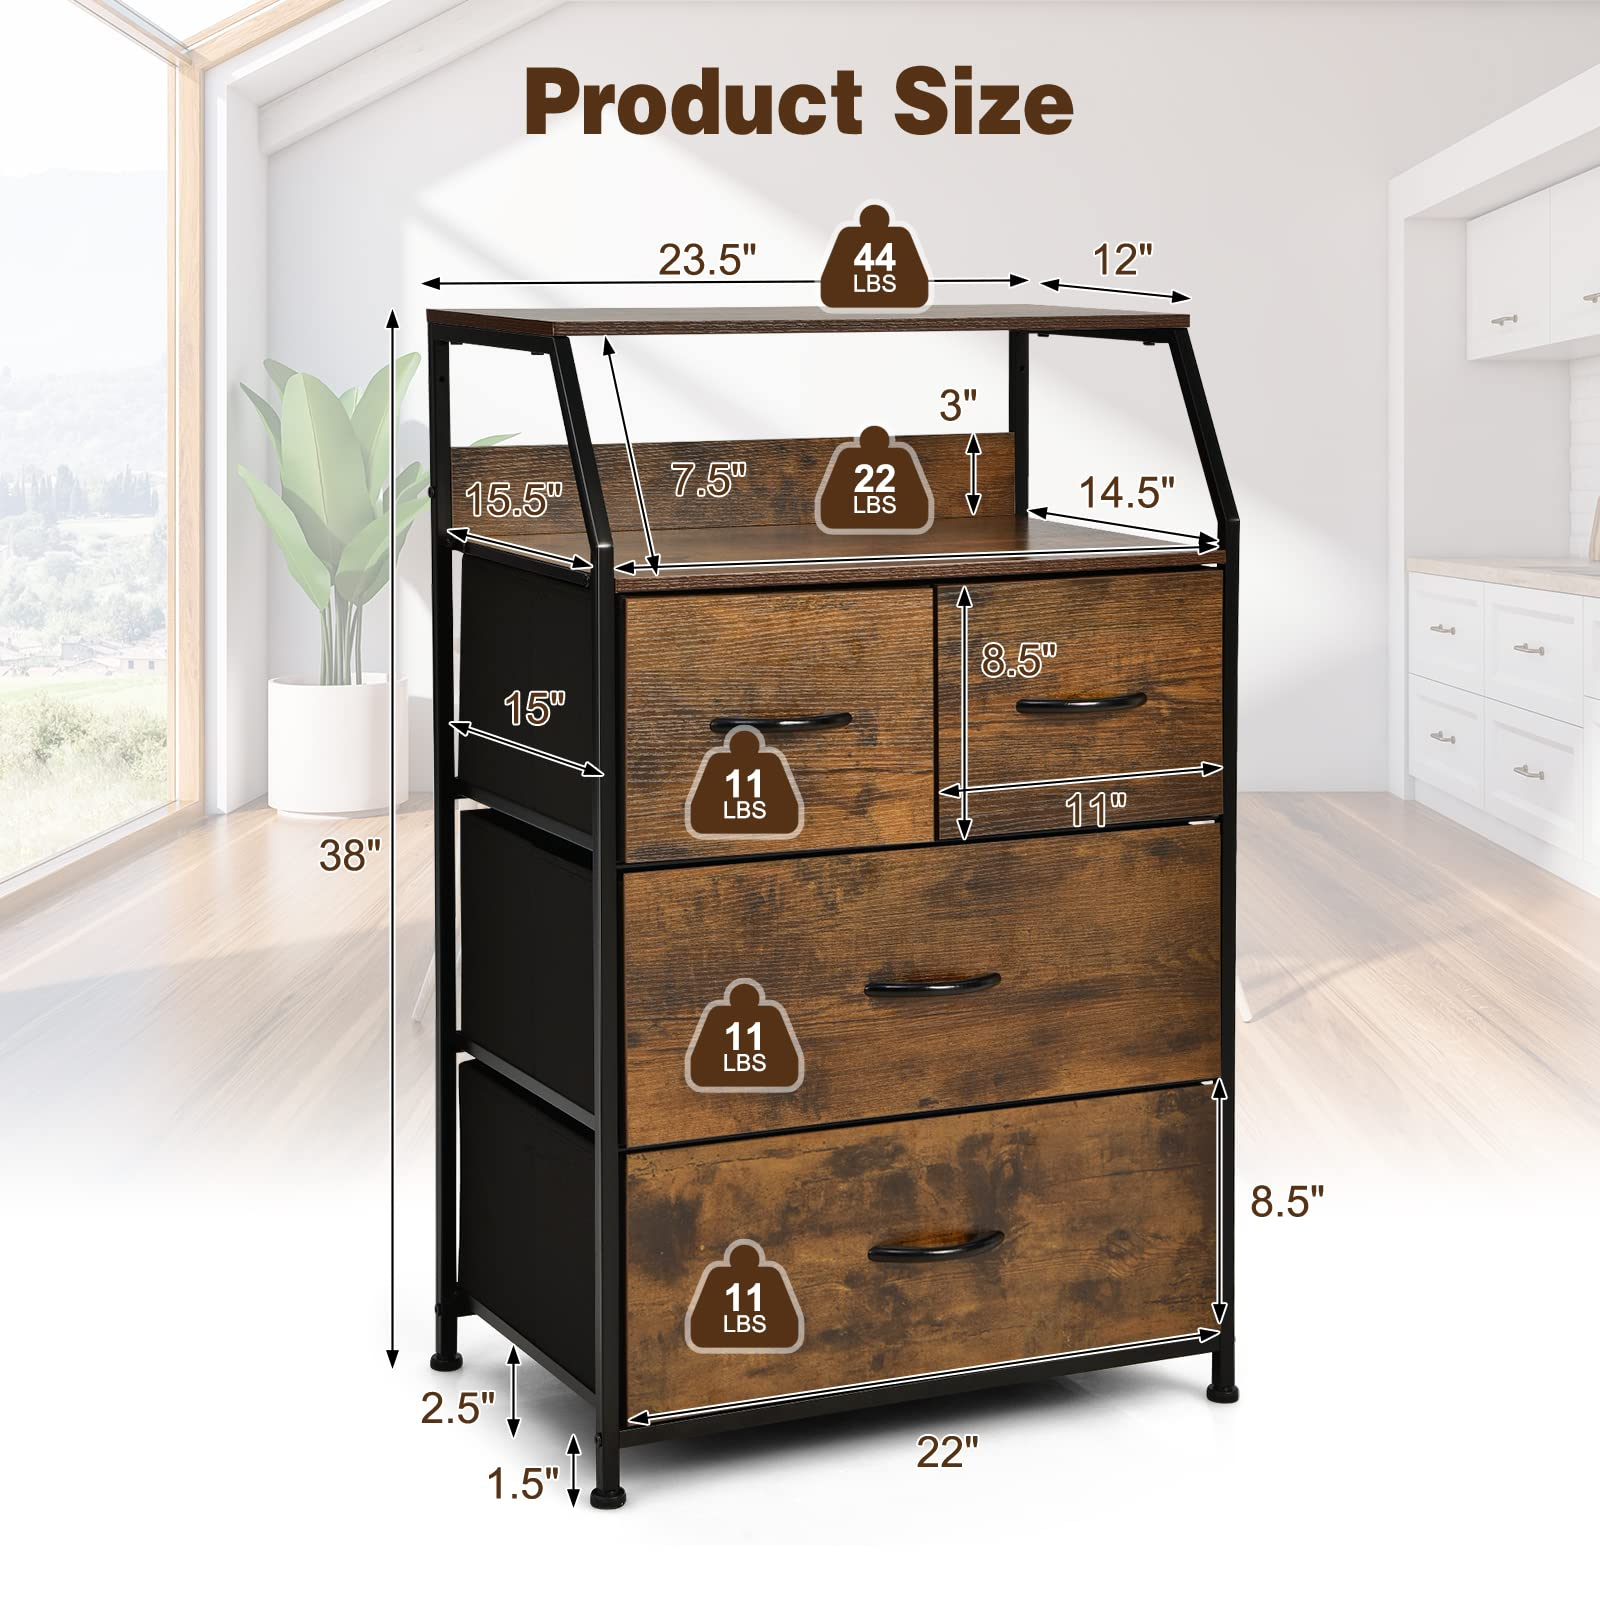 Giantex 4 Drawers Dresser, Tall Storage Tower w/ 5 Foldable Fabric Drawers & Open Shelves